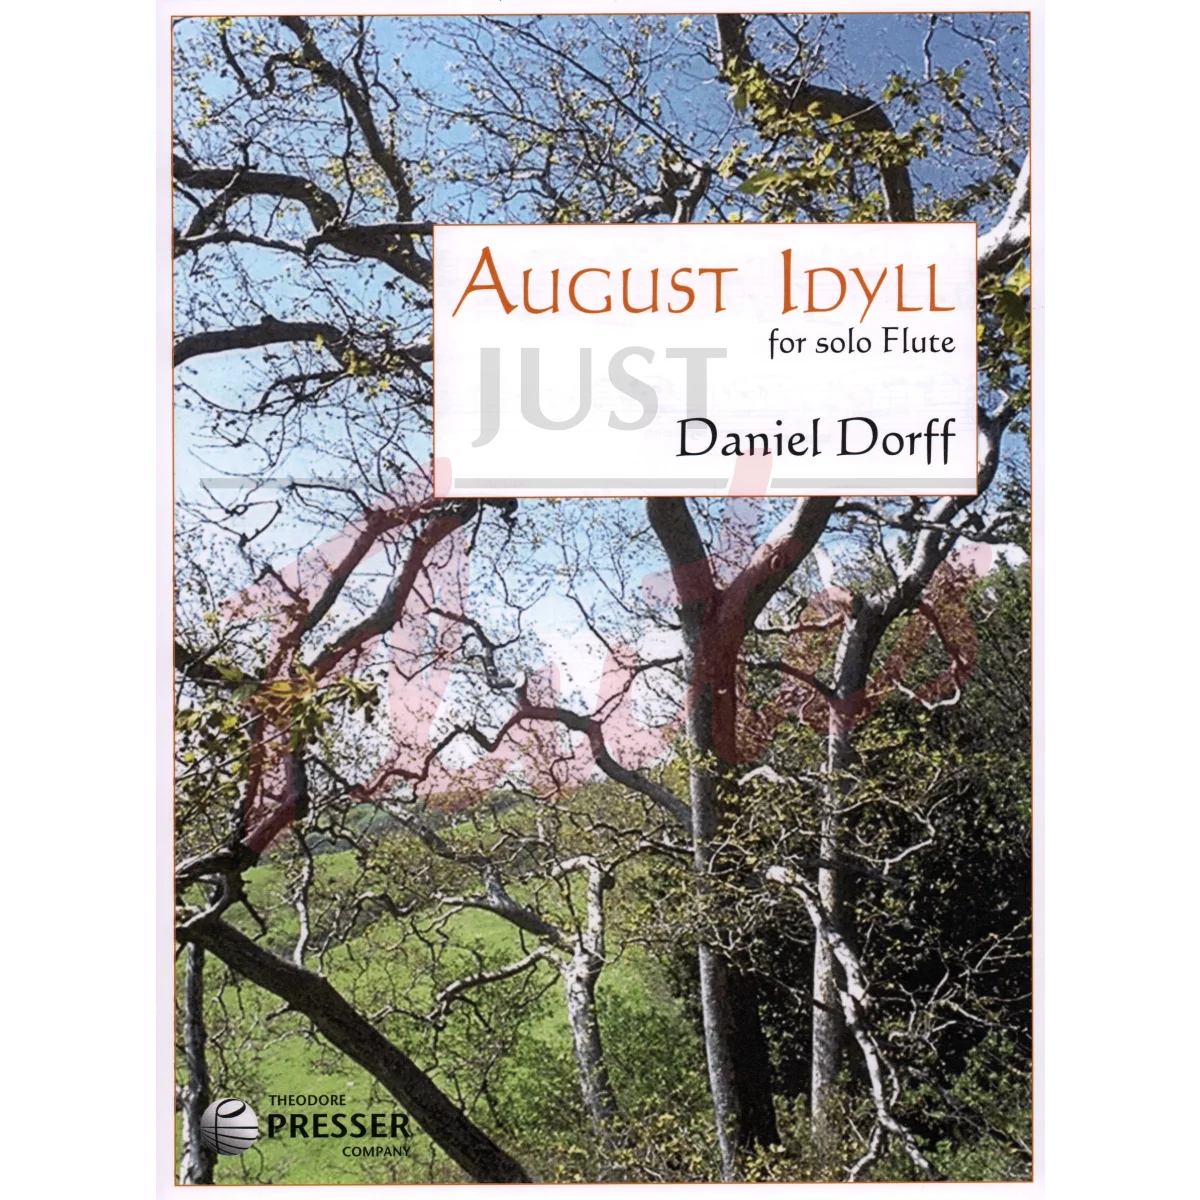 August Idyll for Solo Flute